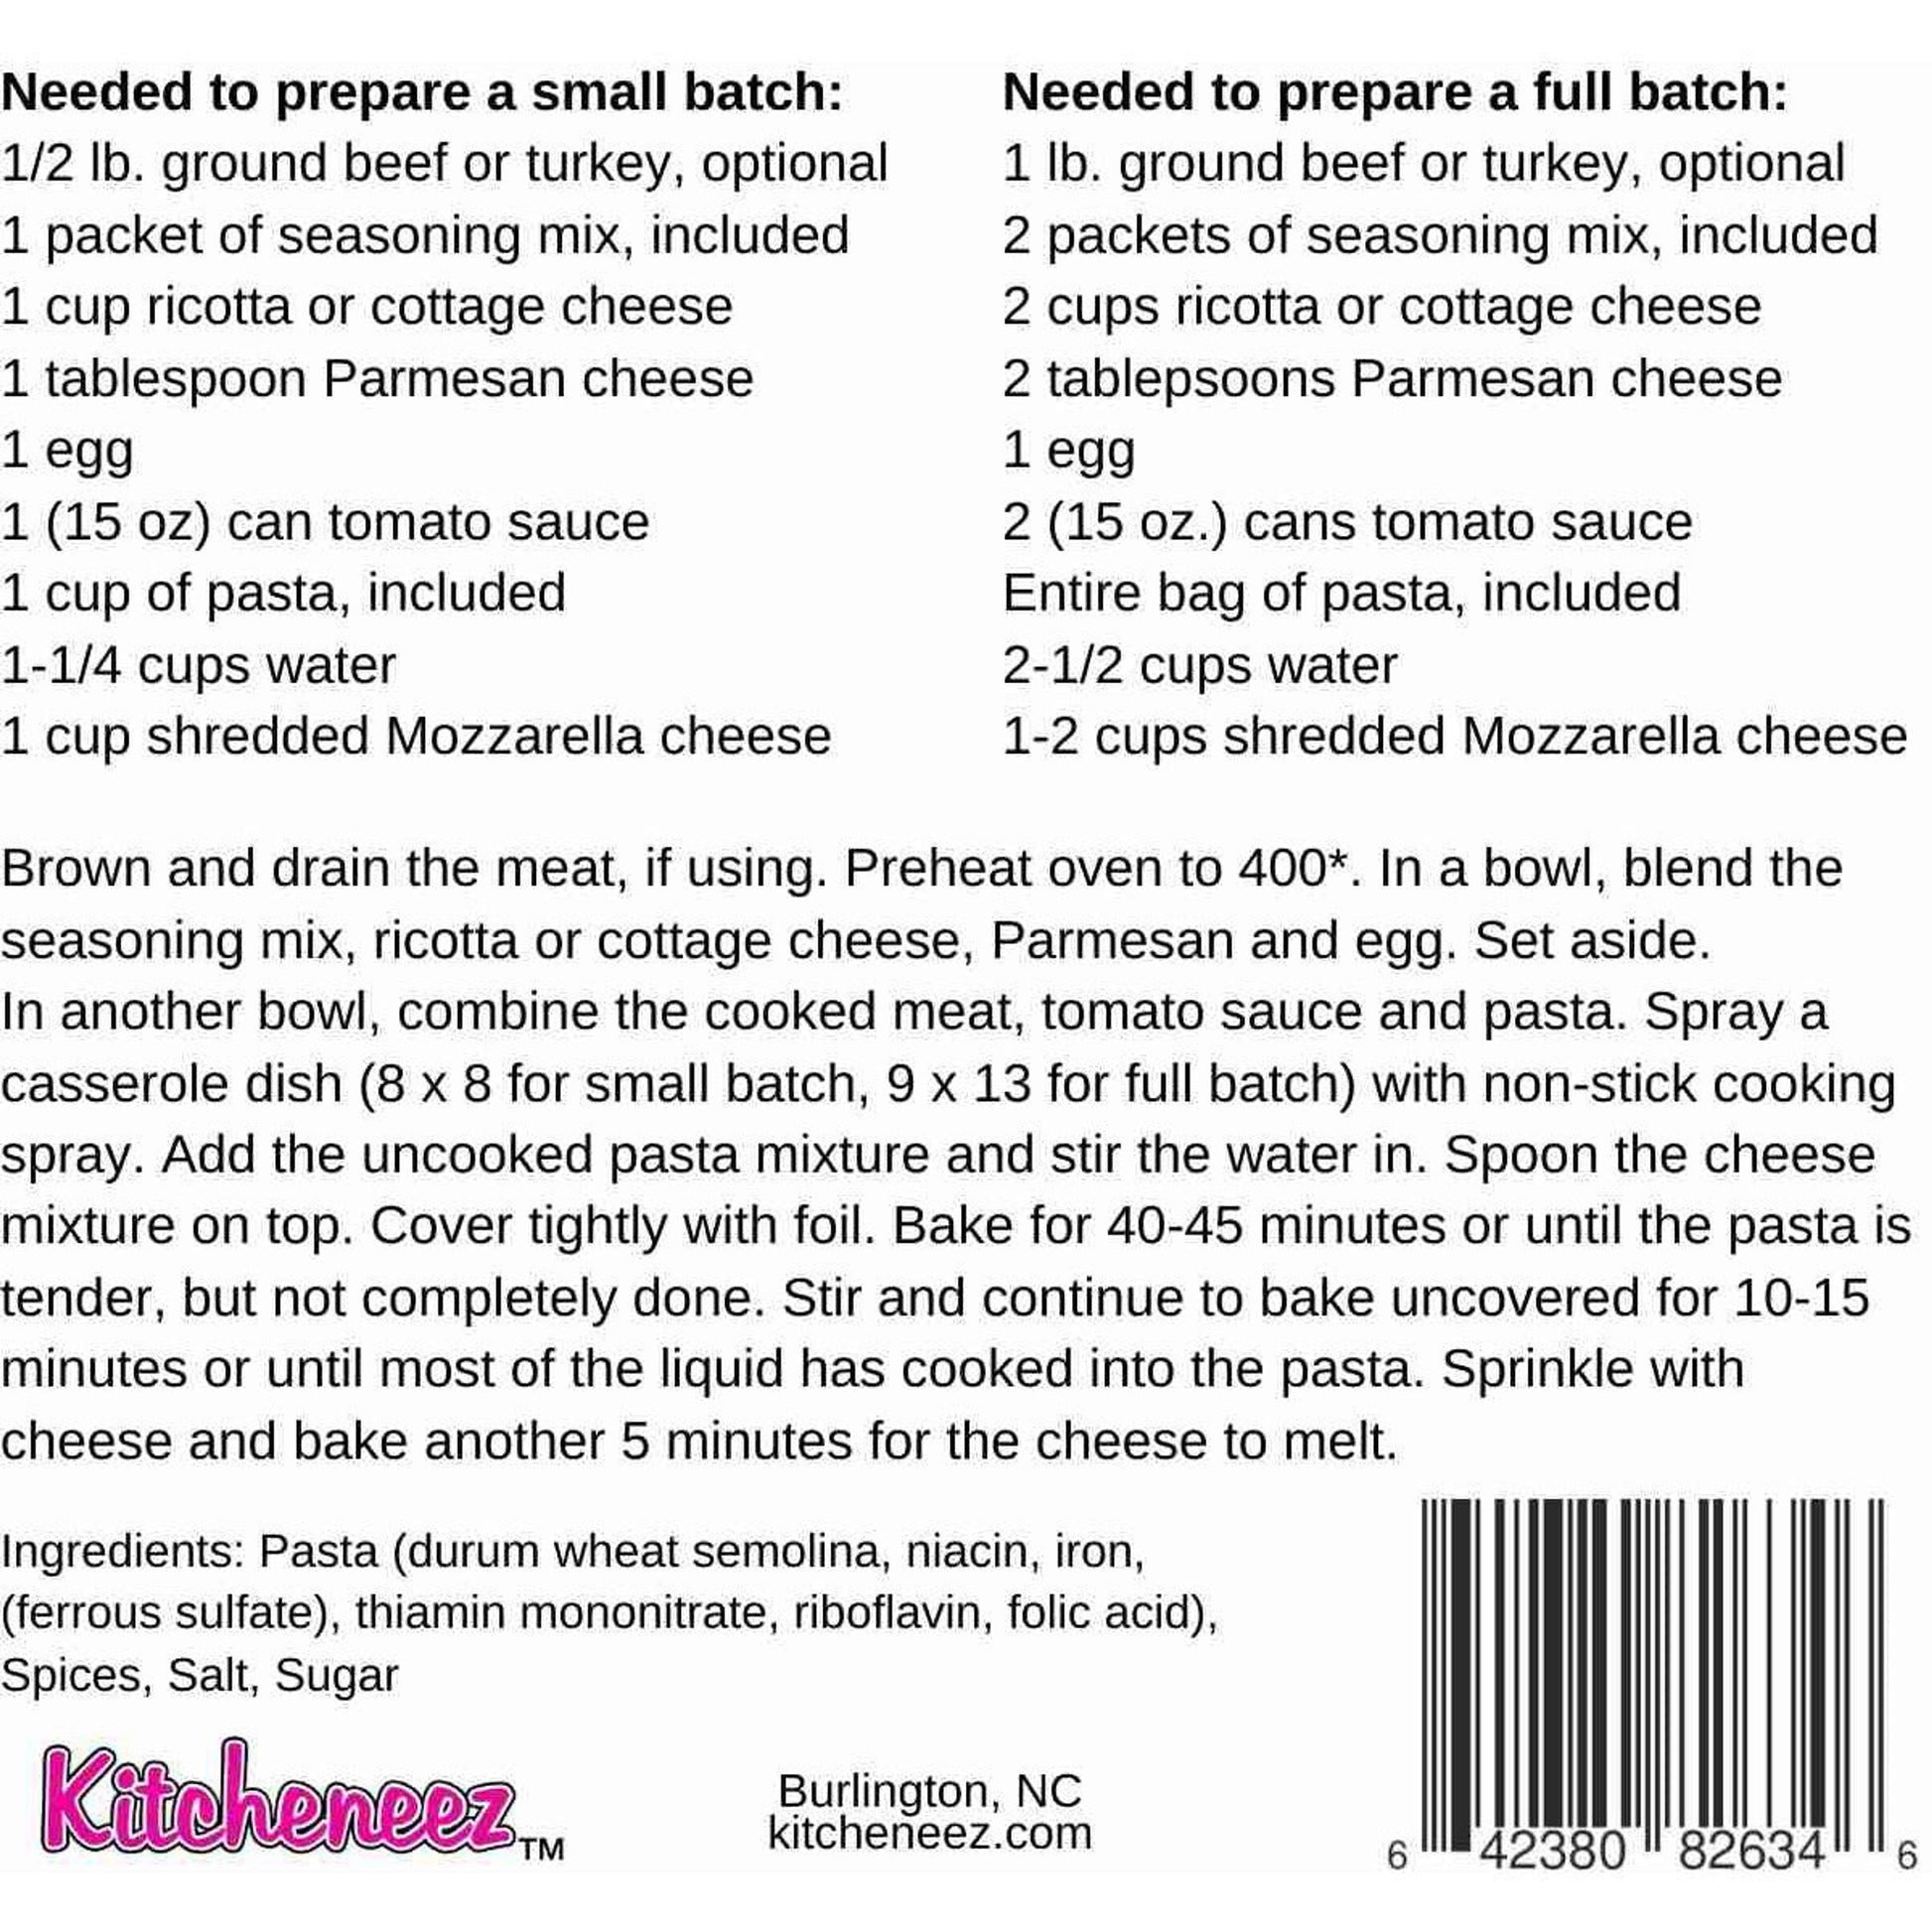 Baked Ziti Dump 'n Bake Meal with pasta included - Kitcheneez Mixes & More!